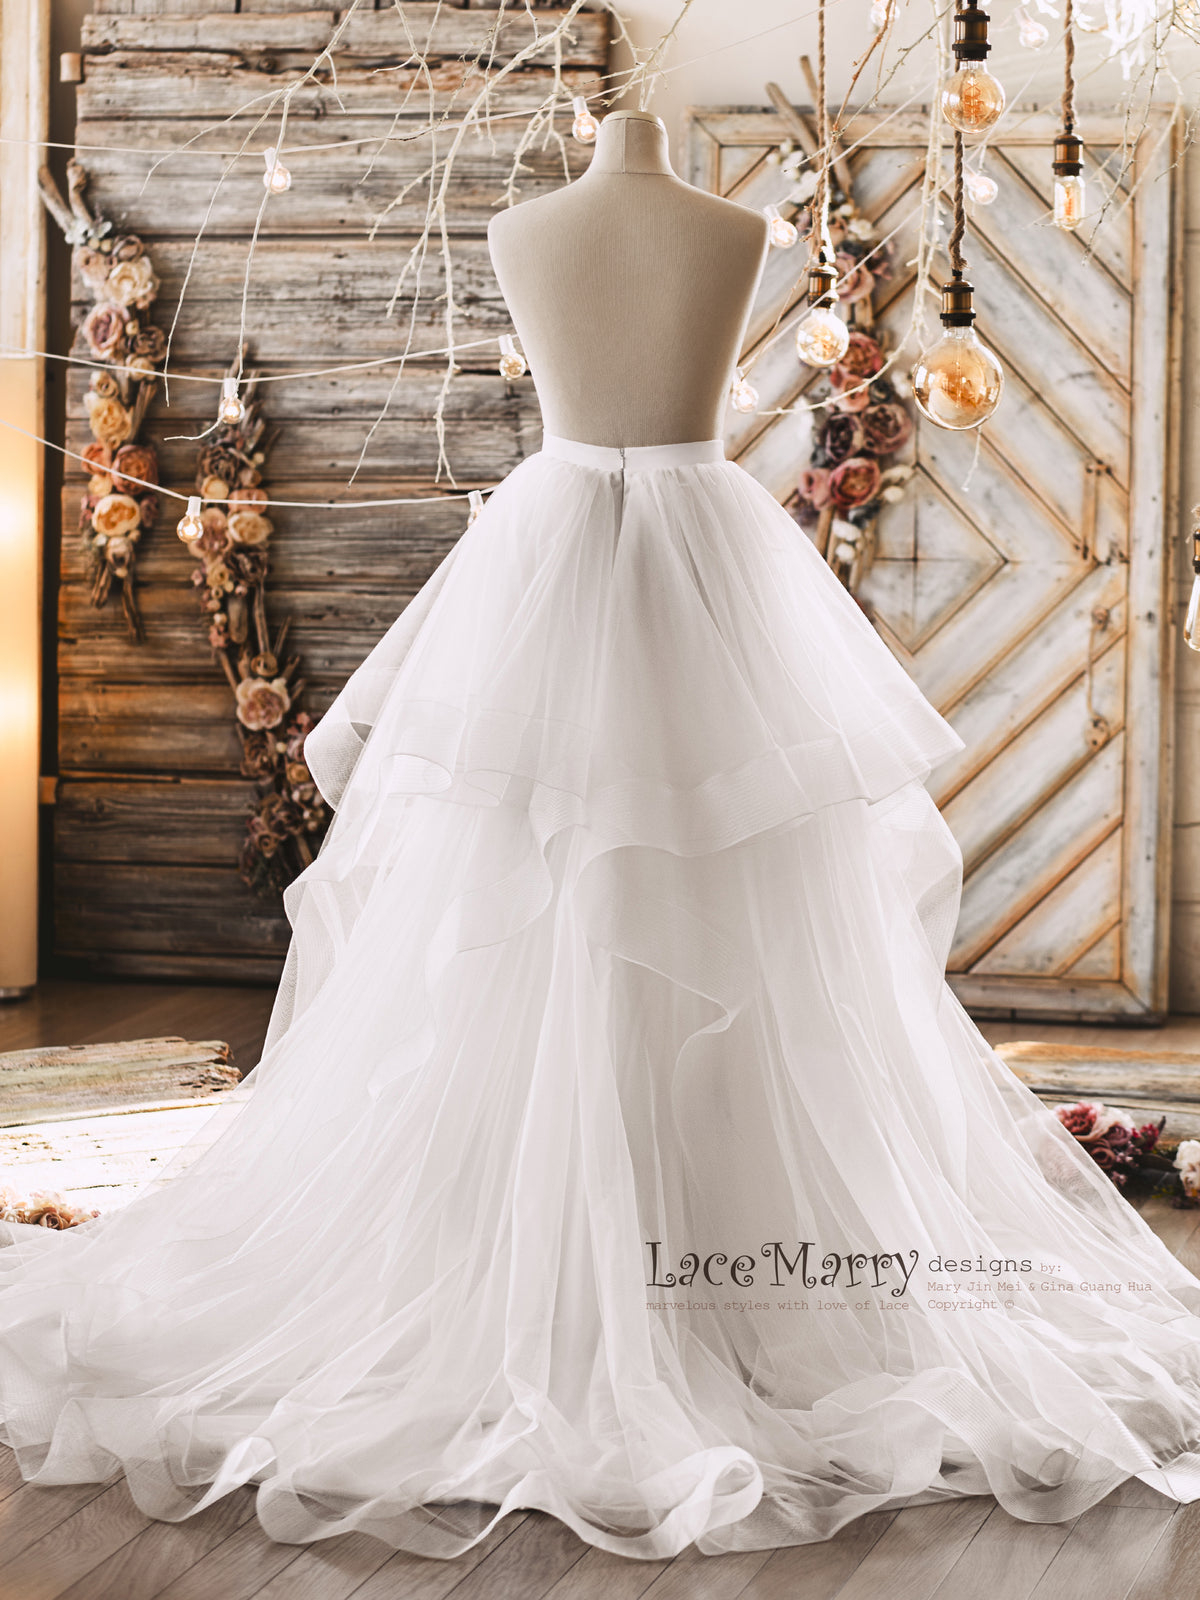 Multi Layer Bridal Skirt with Train